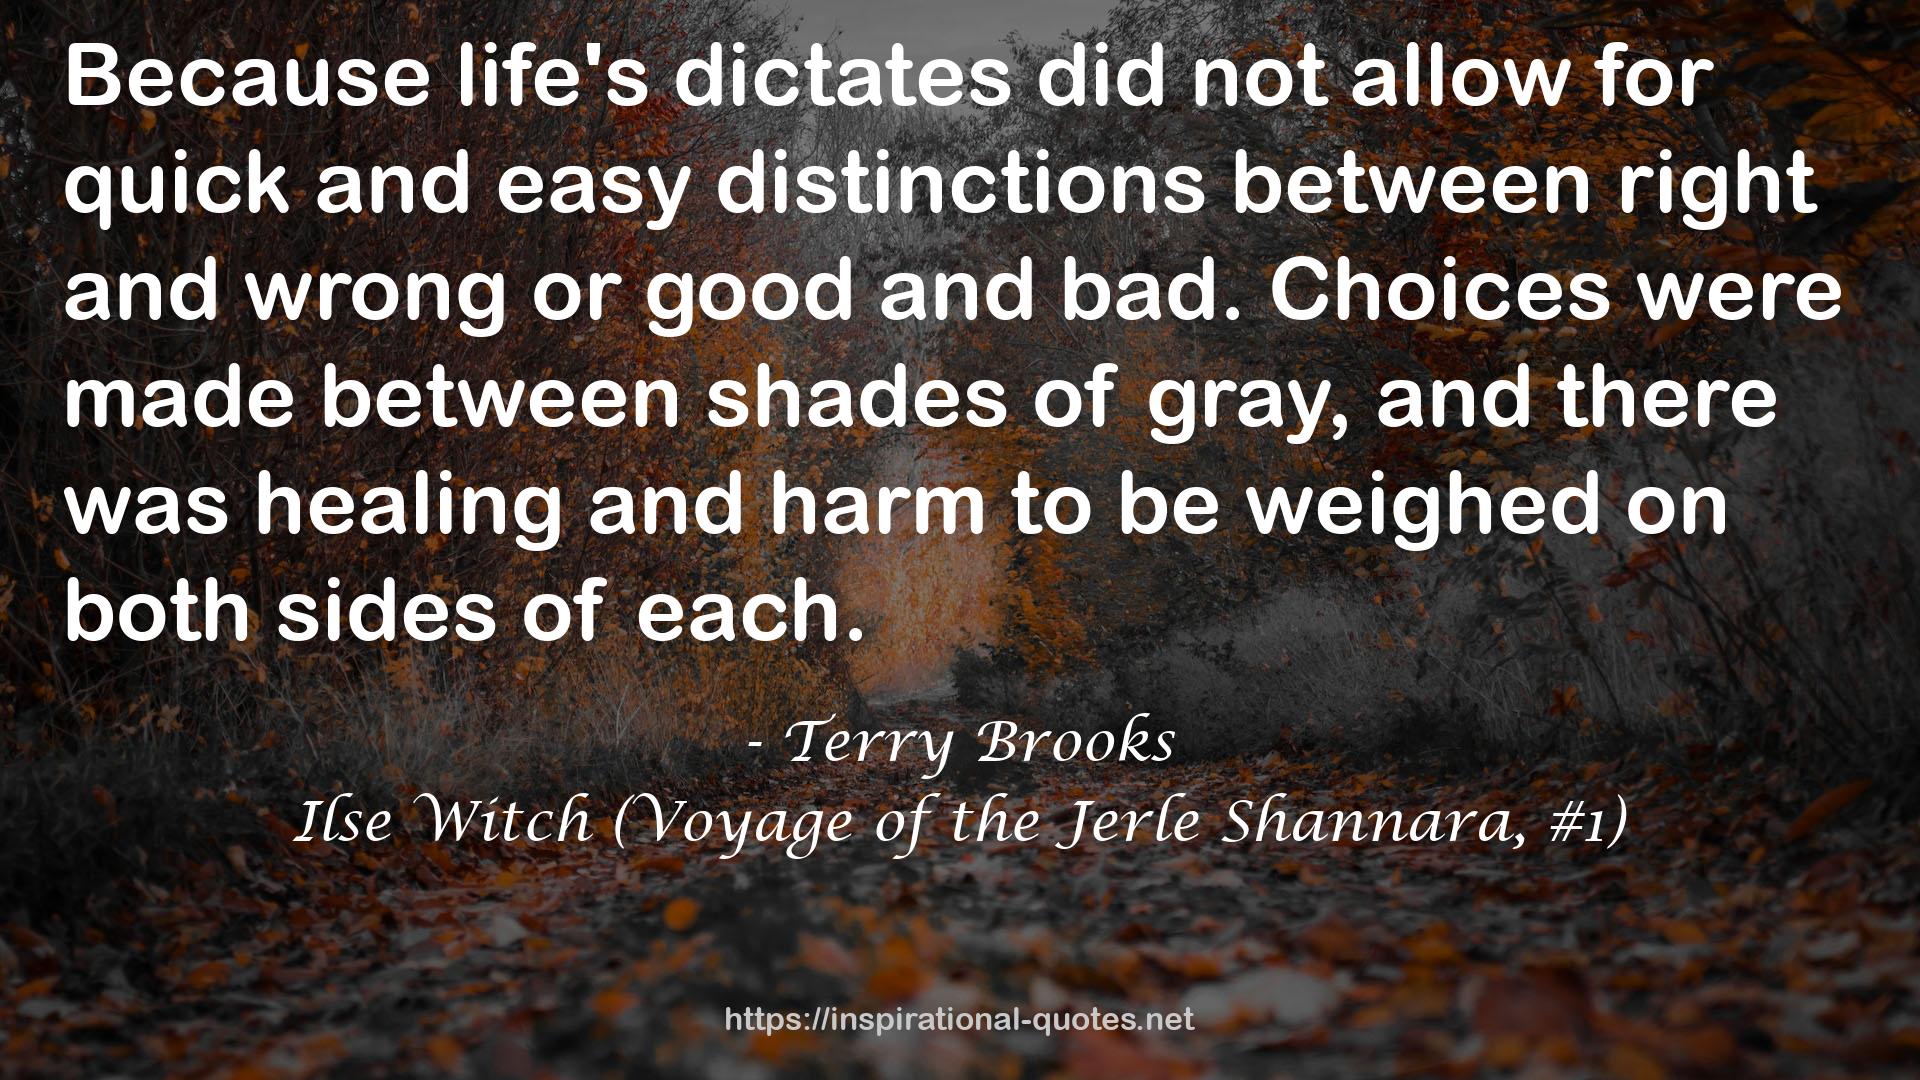 Ilse Witch (Voyage of the Jerle Shannara, #1) QUOTES